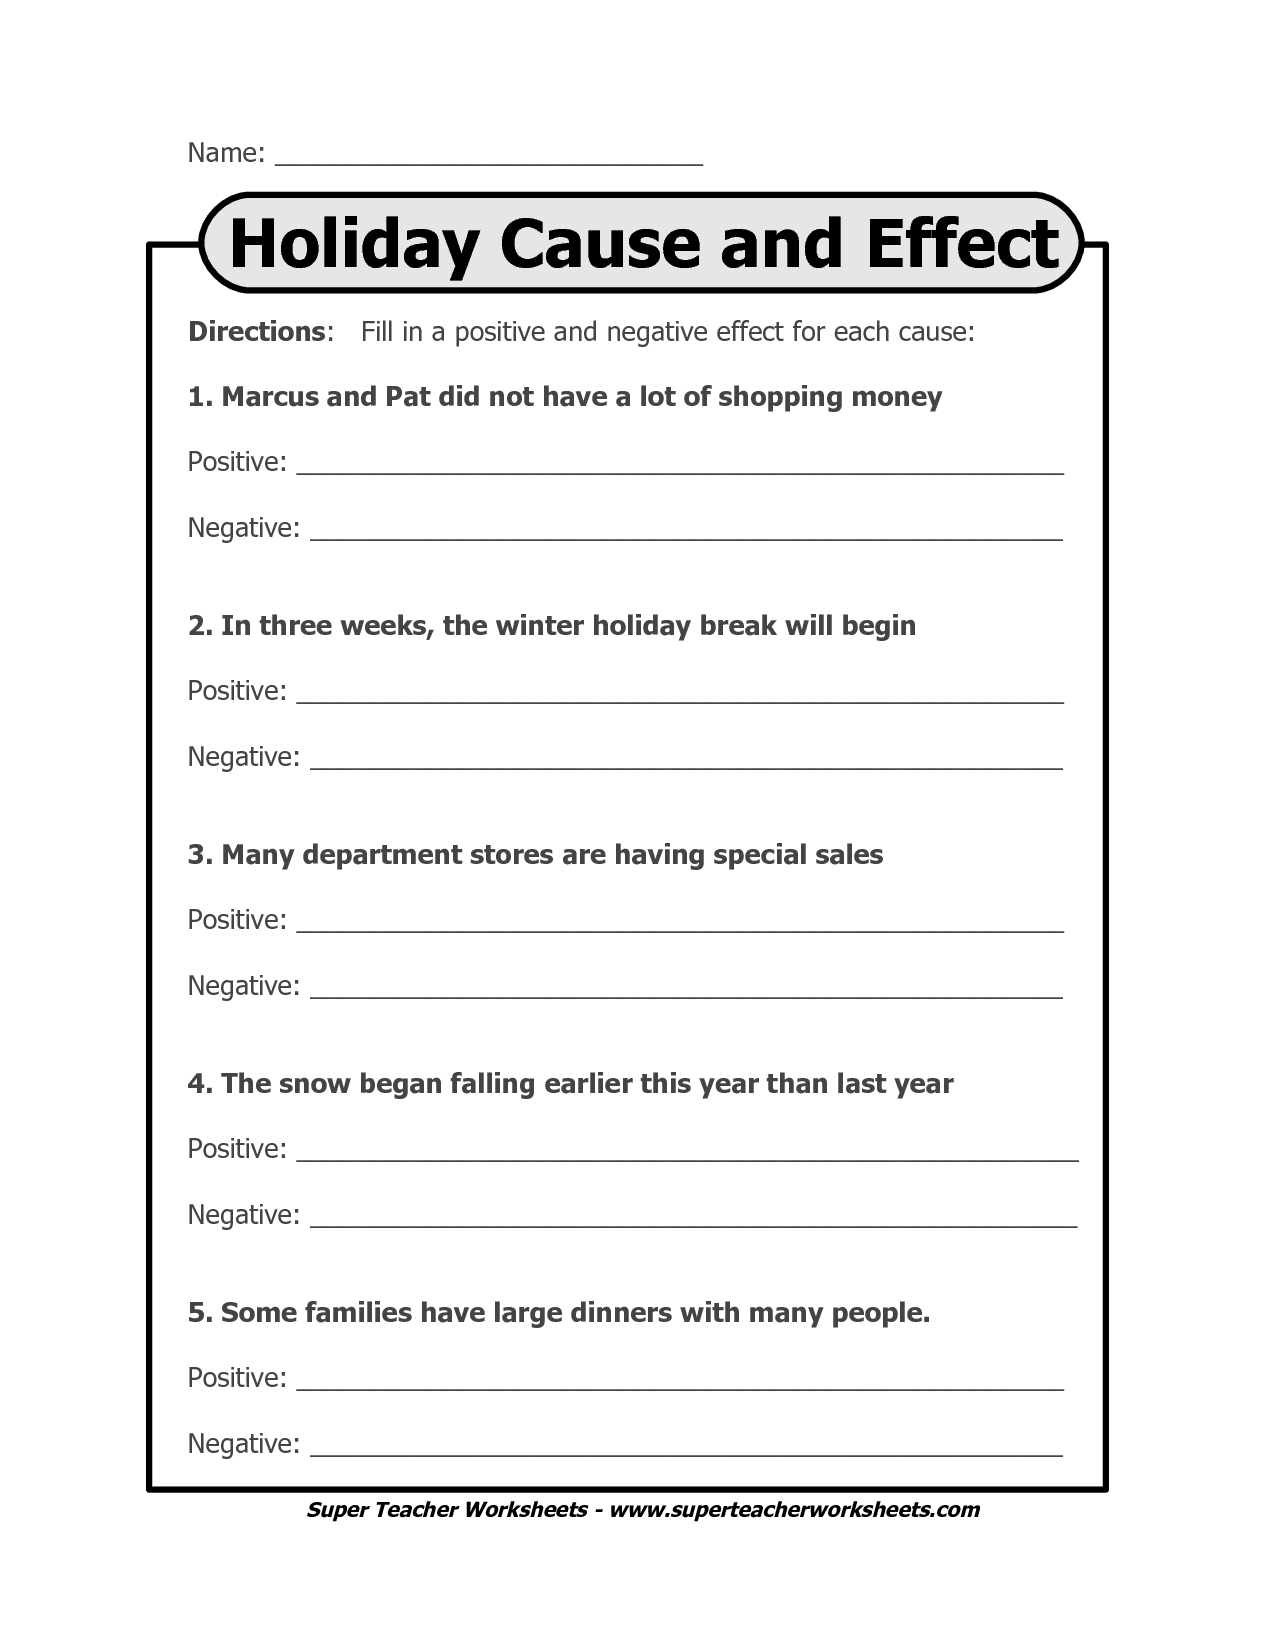 17-best-images-of-identify-cause-and-effect-worksheets-cause-and